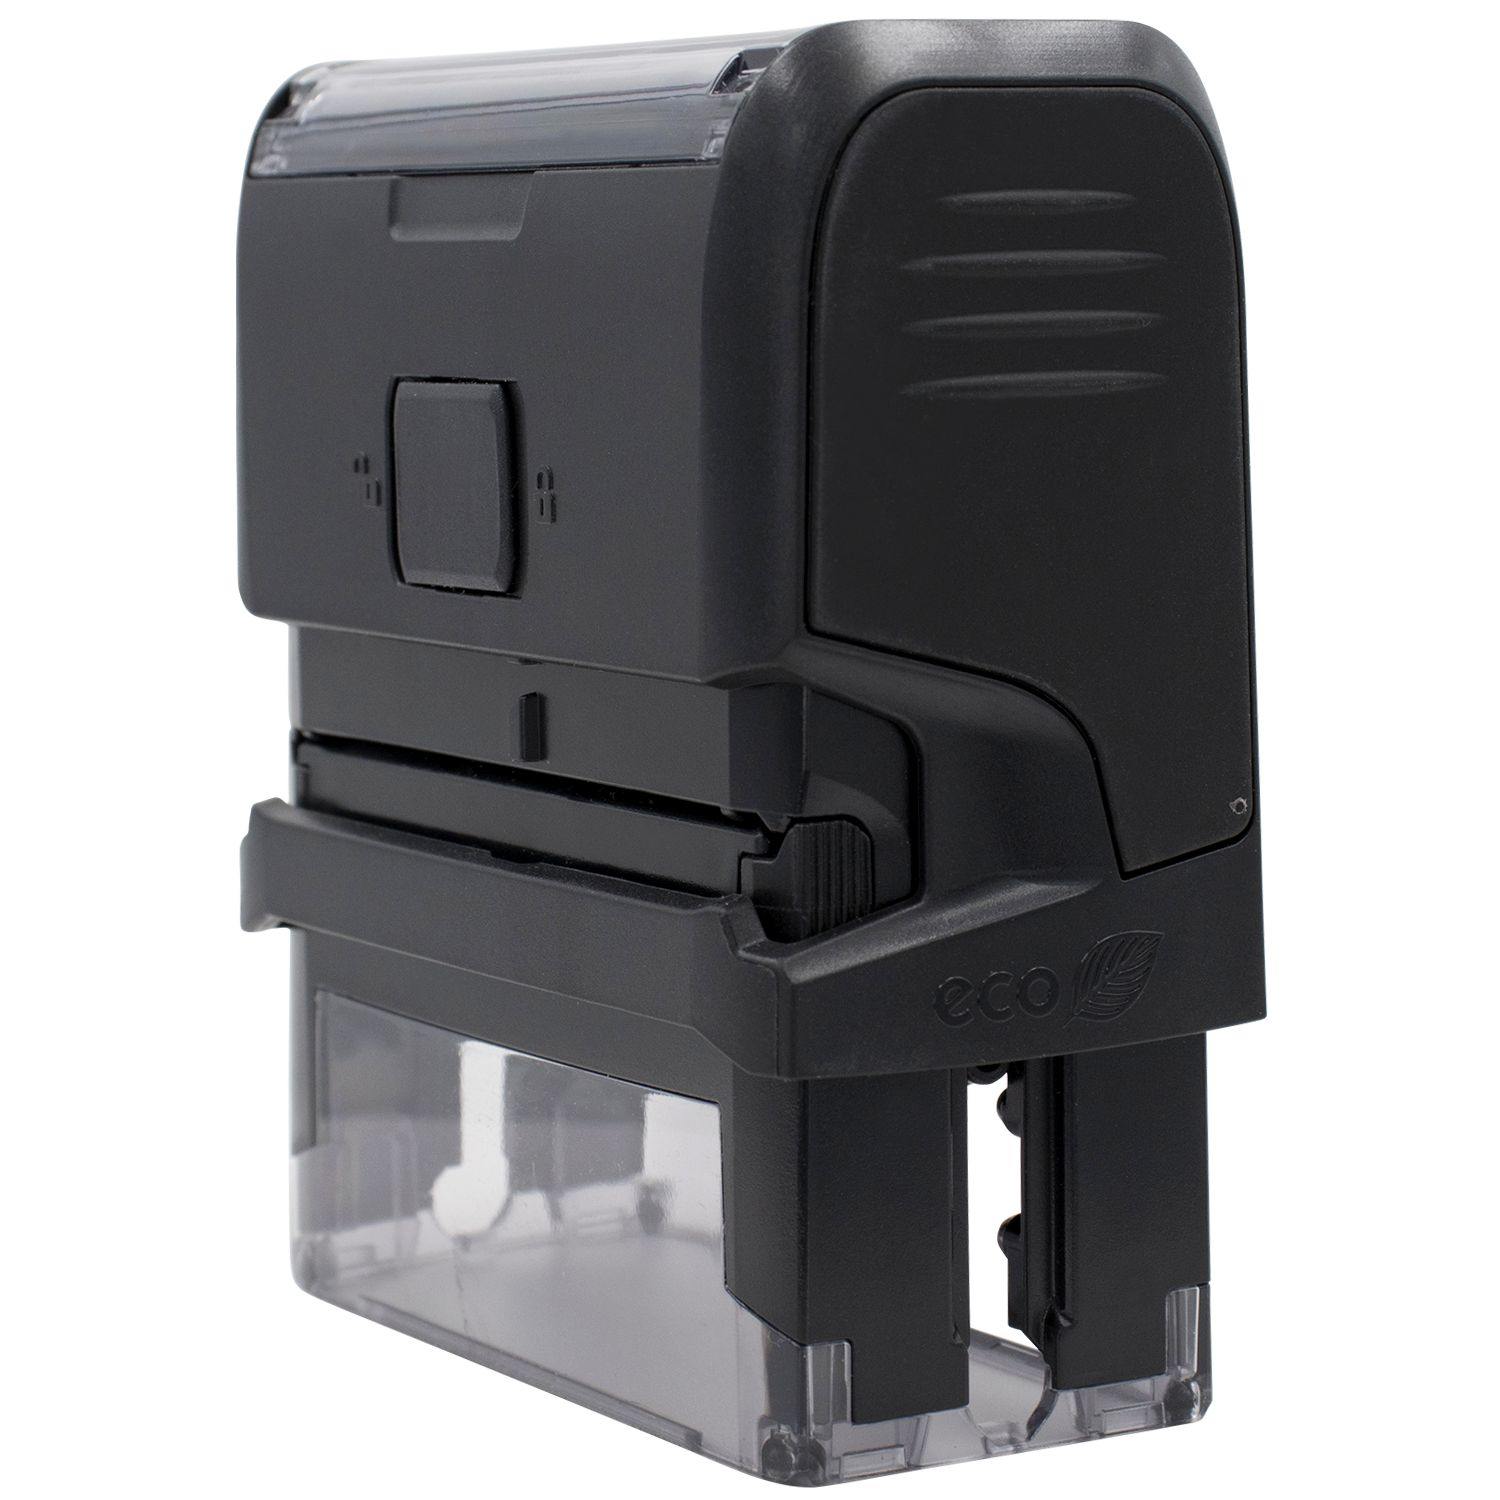 Self Inking Void Stamp - Engineer Seal Stamps - Brand_Trodat, Impression Size_Small, Stamp Type_Self-Inking Stamp, Type of Use_Office